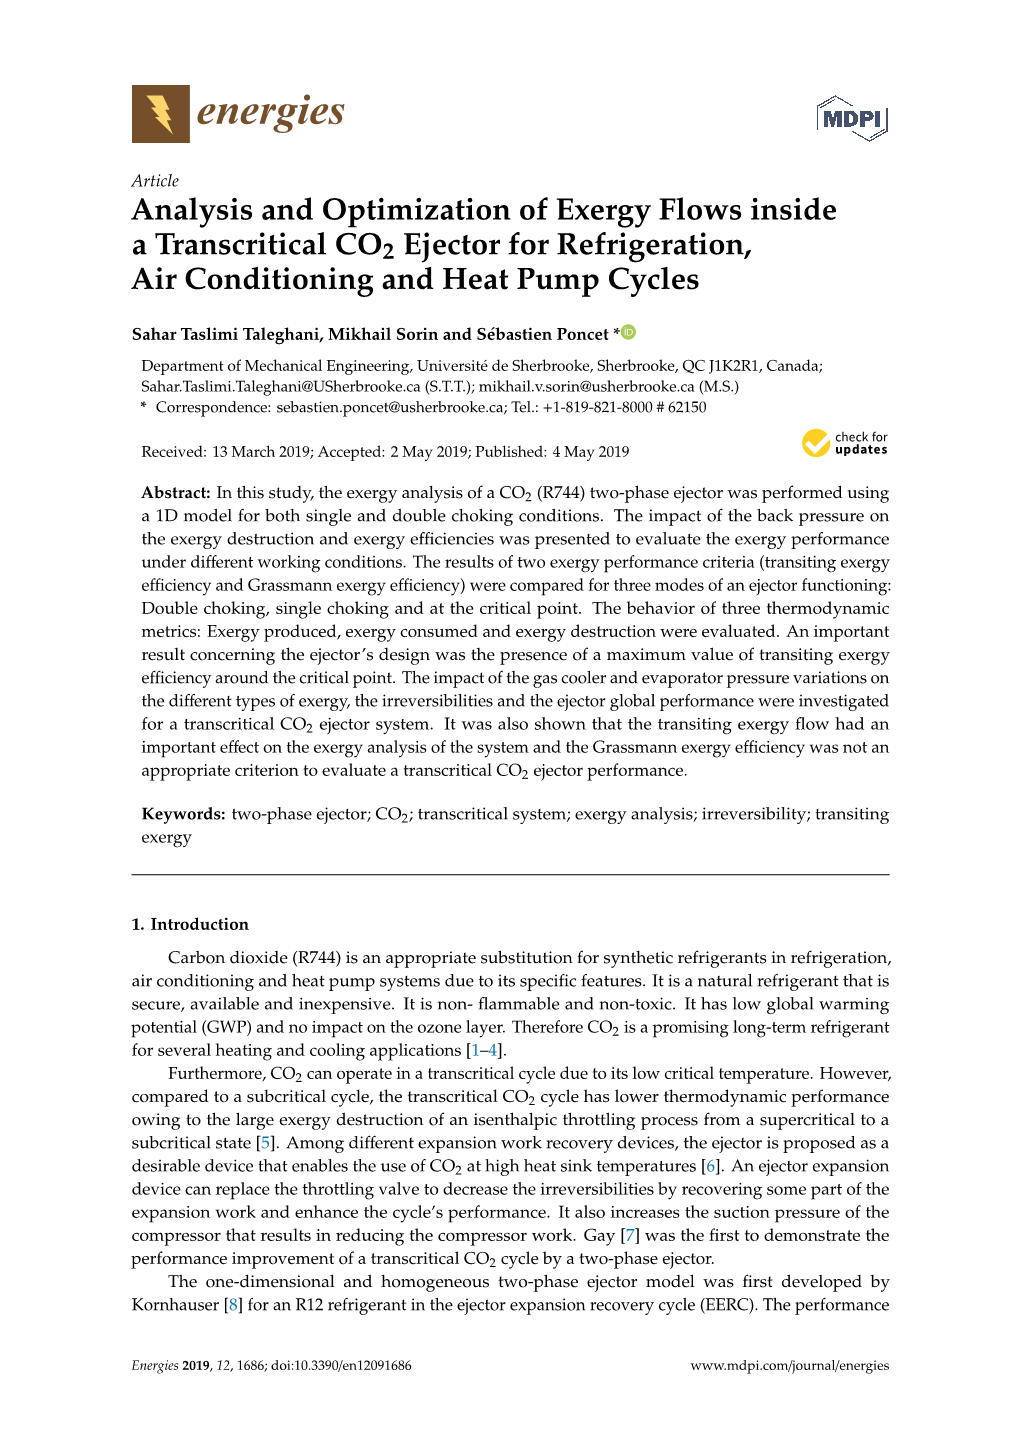 Analysis and Optimization of Exergy Flows Inside a Transcritical CO2 Ejector for Refrigeration, Air Conditioning and Heat Pump Cycles